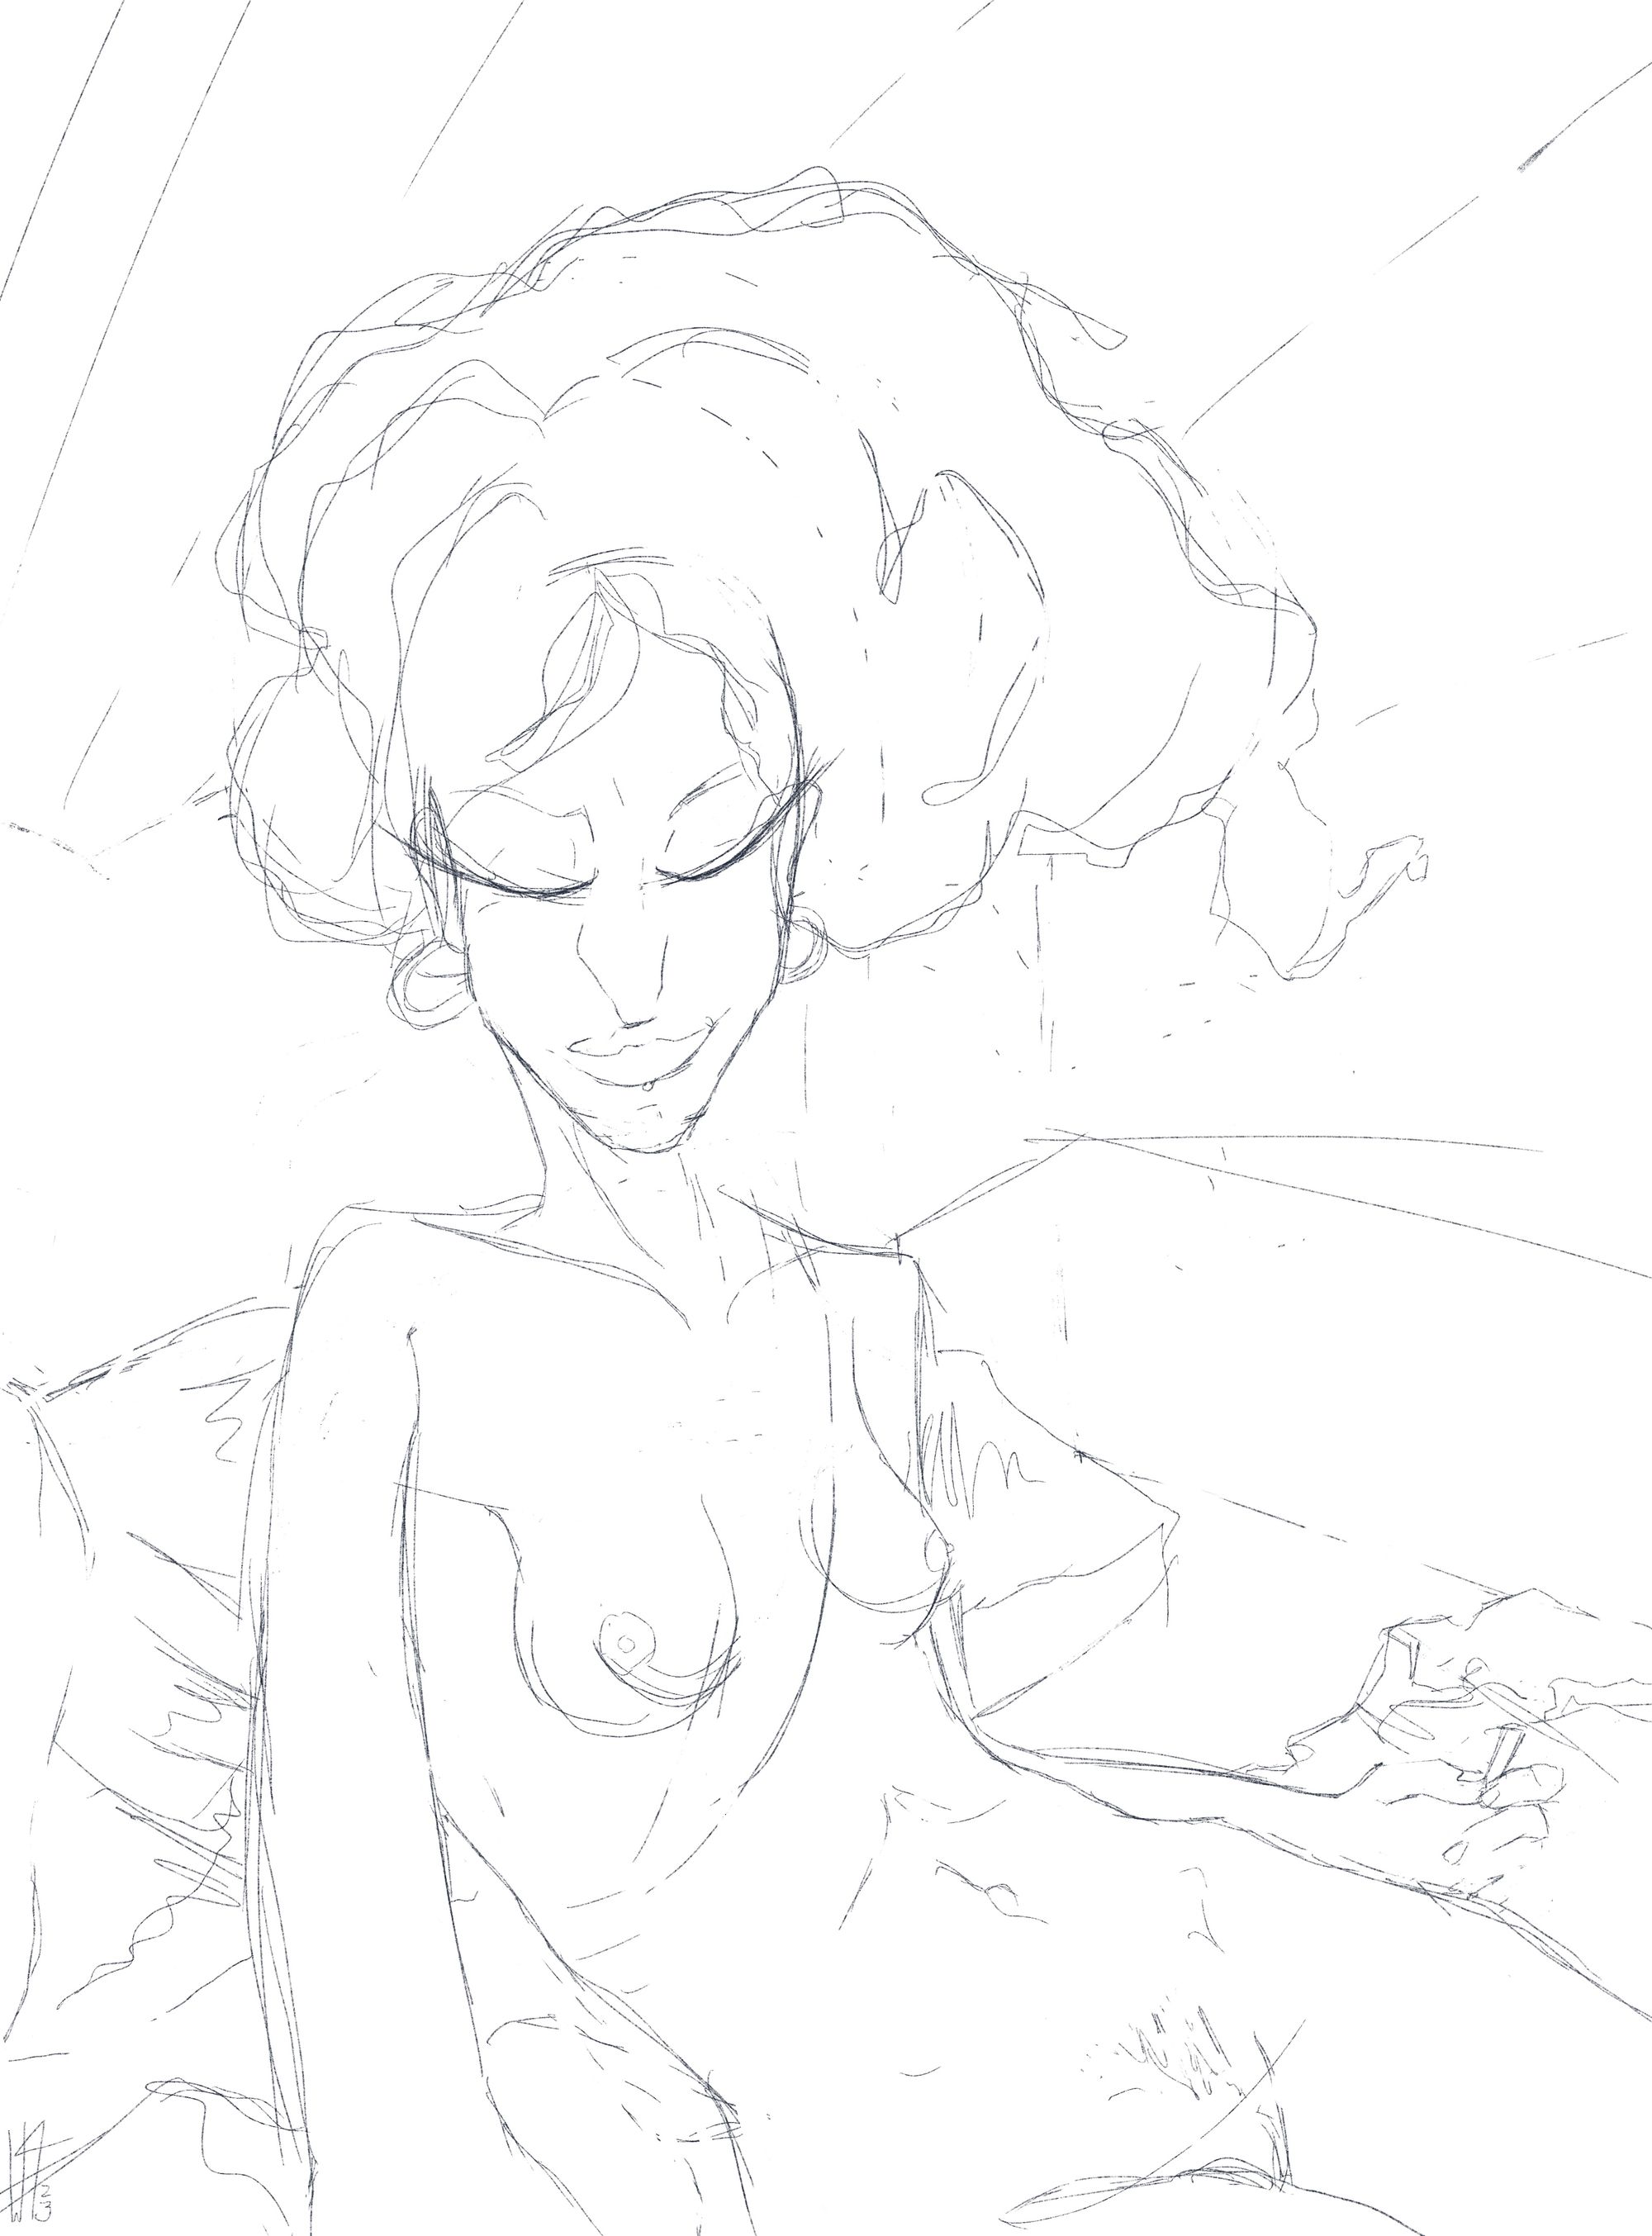 A woman reclines nude on her bed, a peaceful smile on her face. She wears small hoop earrings and holds a smoldering hand-rolled cigarette between her thumb and forefinger. Her hair is voluminous and floats like a cloud behind her head. The drawing is littered with sketch lines, partially erased.